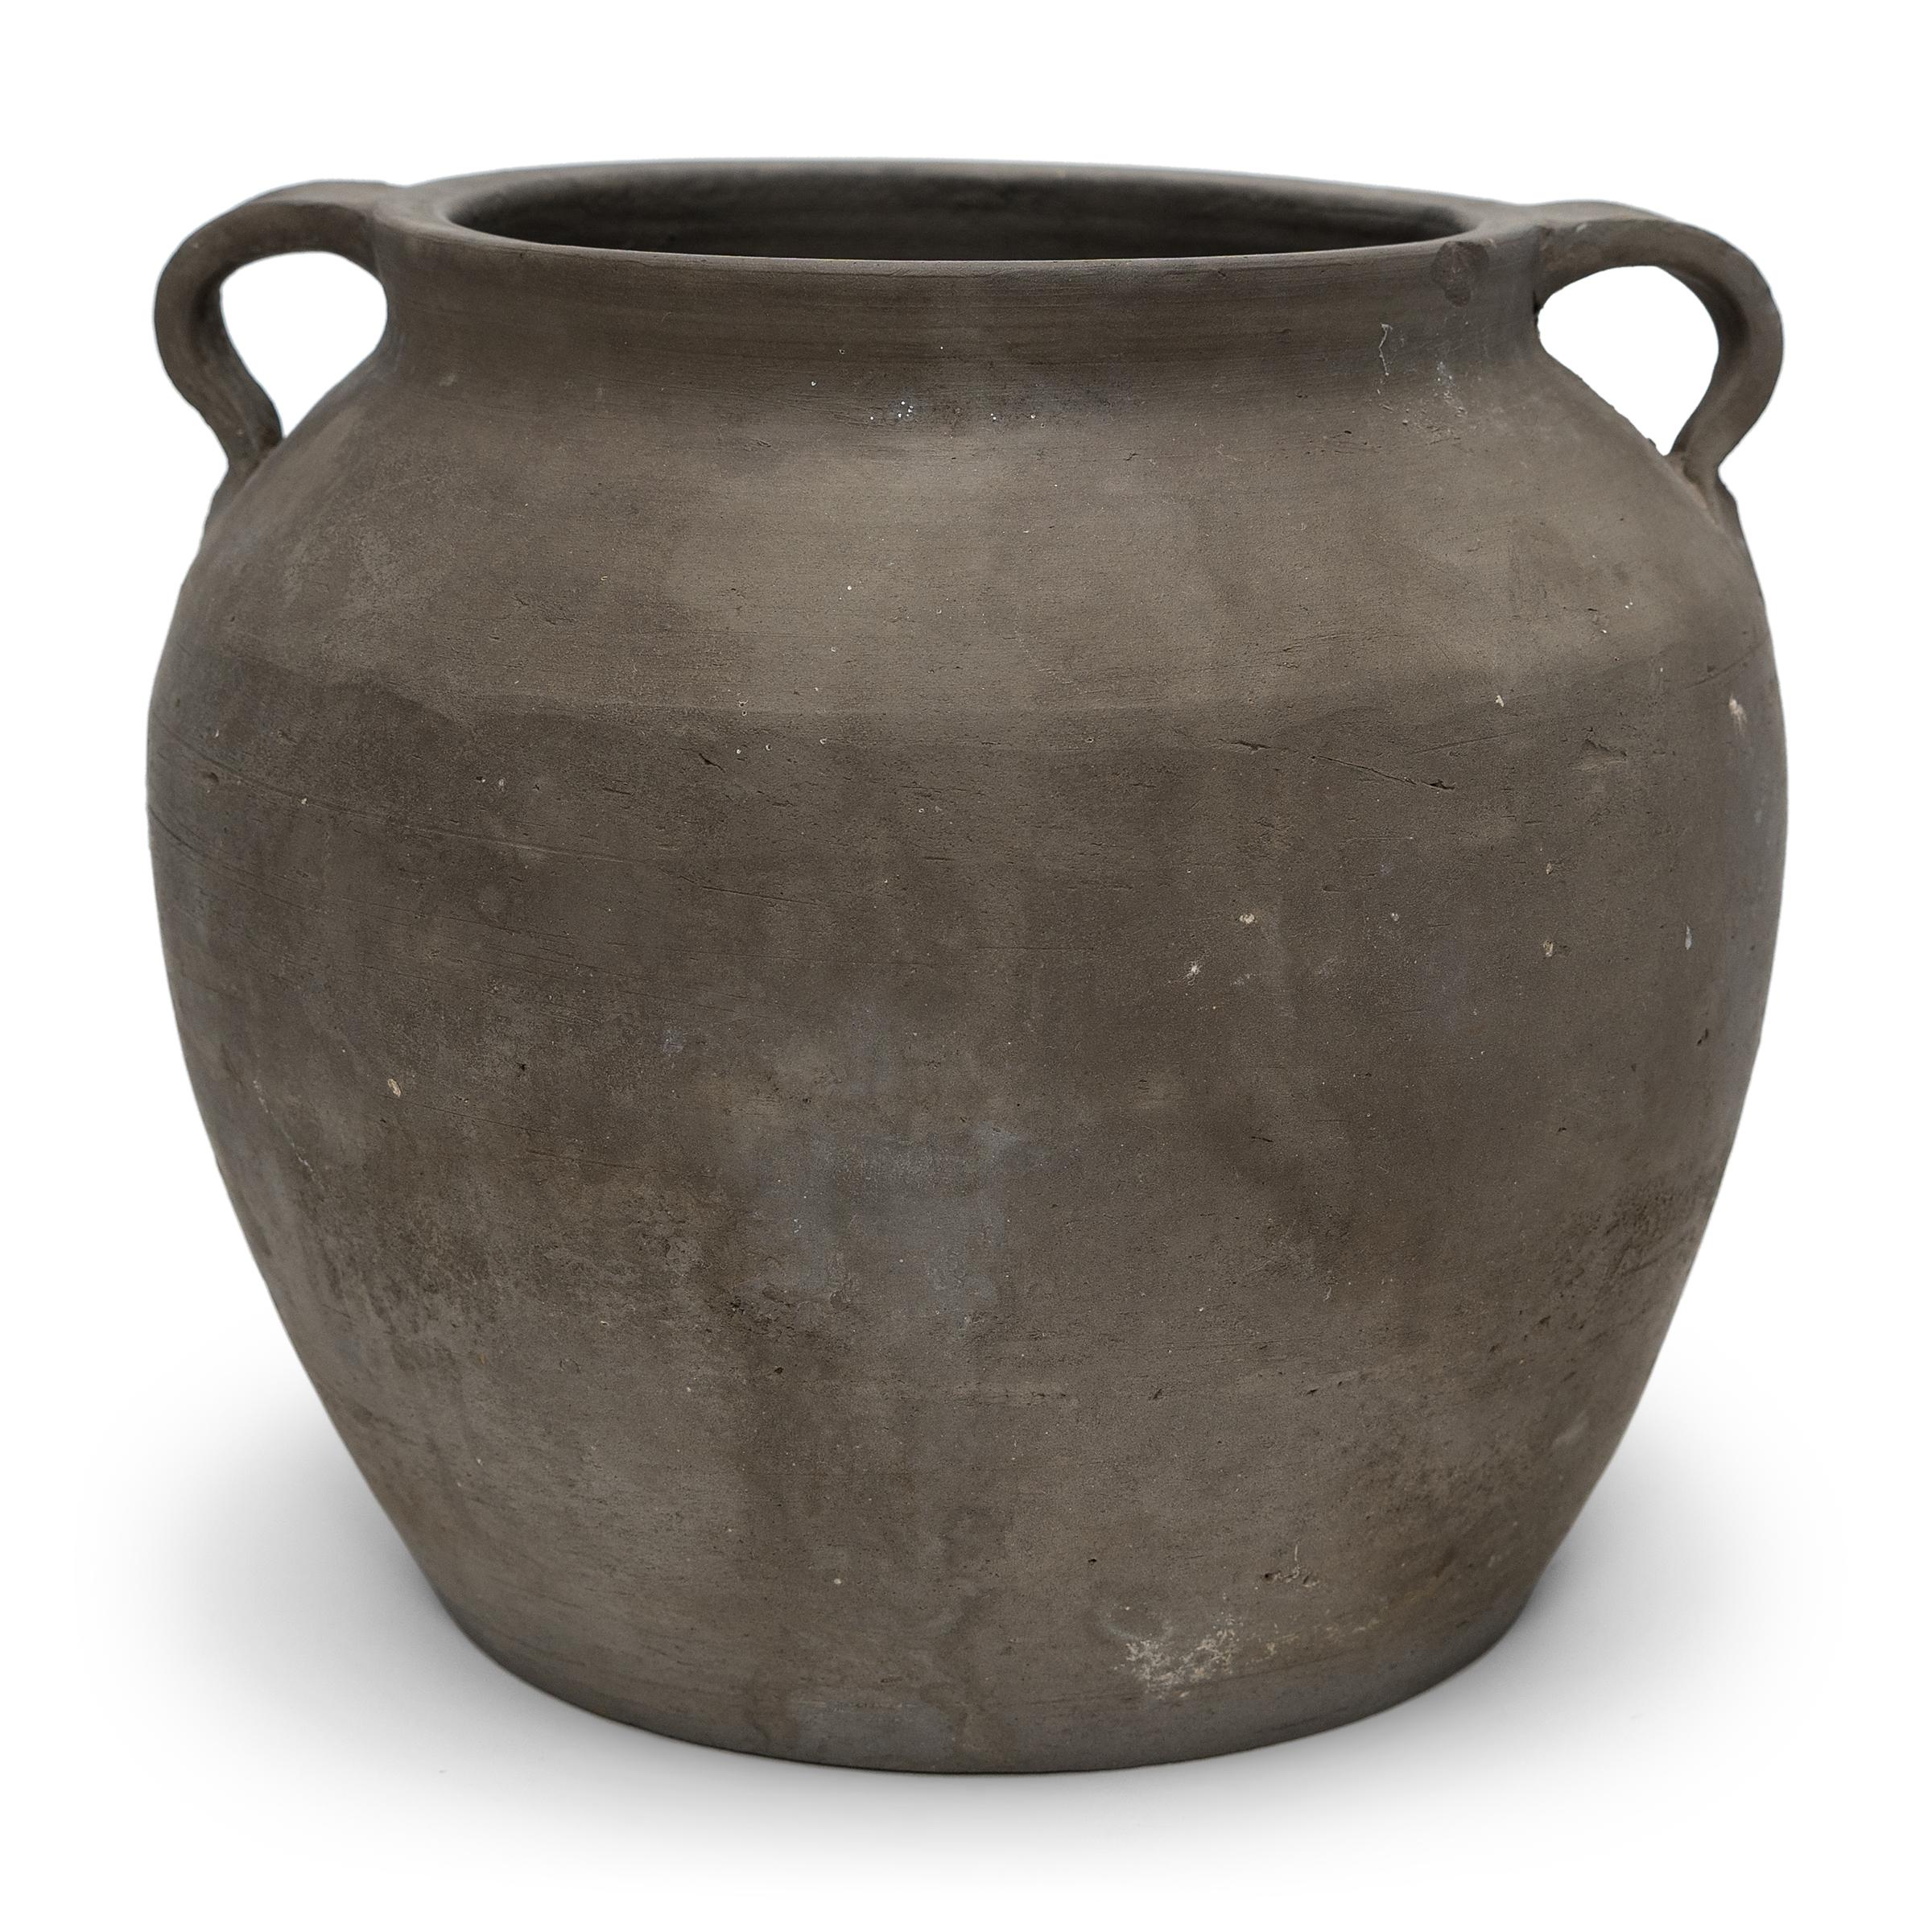 Charged with the humble task of storing dry goods, this small earthenware jar was hand-shaped in the early 20th century with balanced proportions and a beautifully irregular unglazed surface. The round jar has a tapered form with a narrow base, high